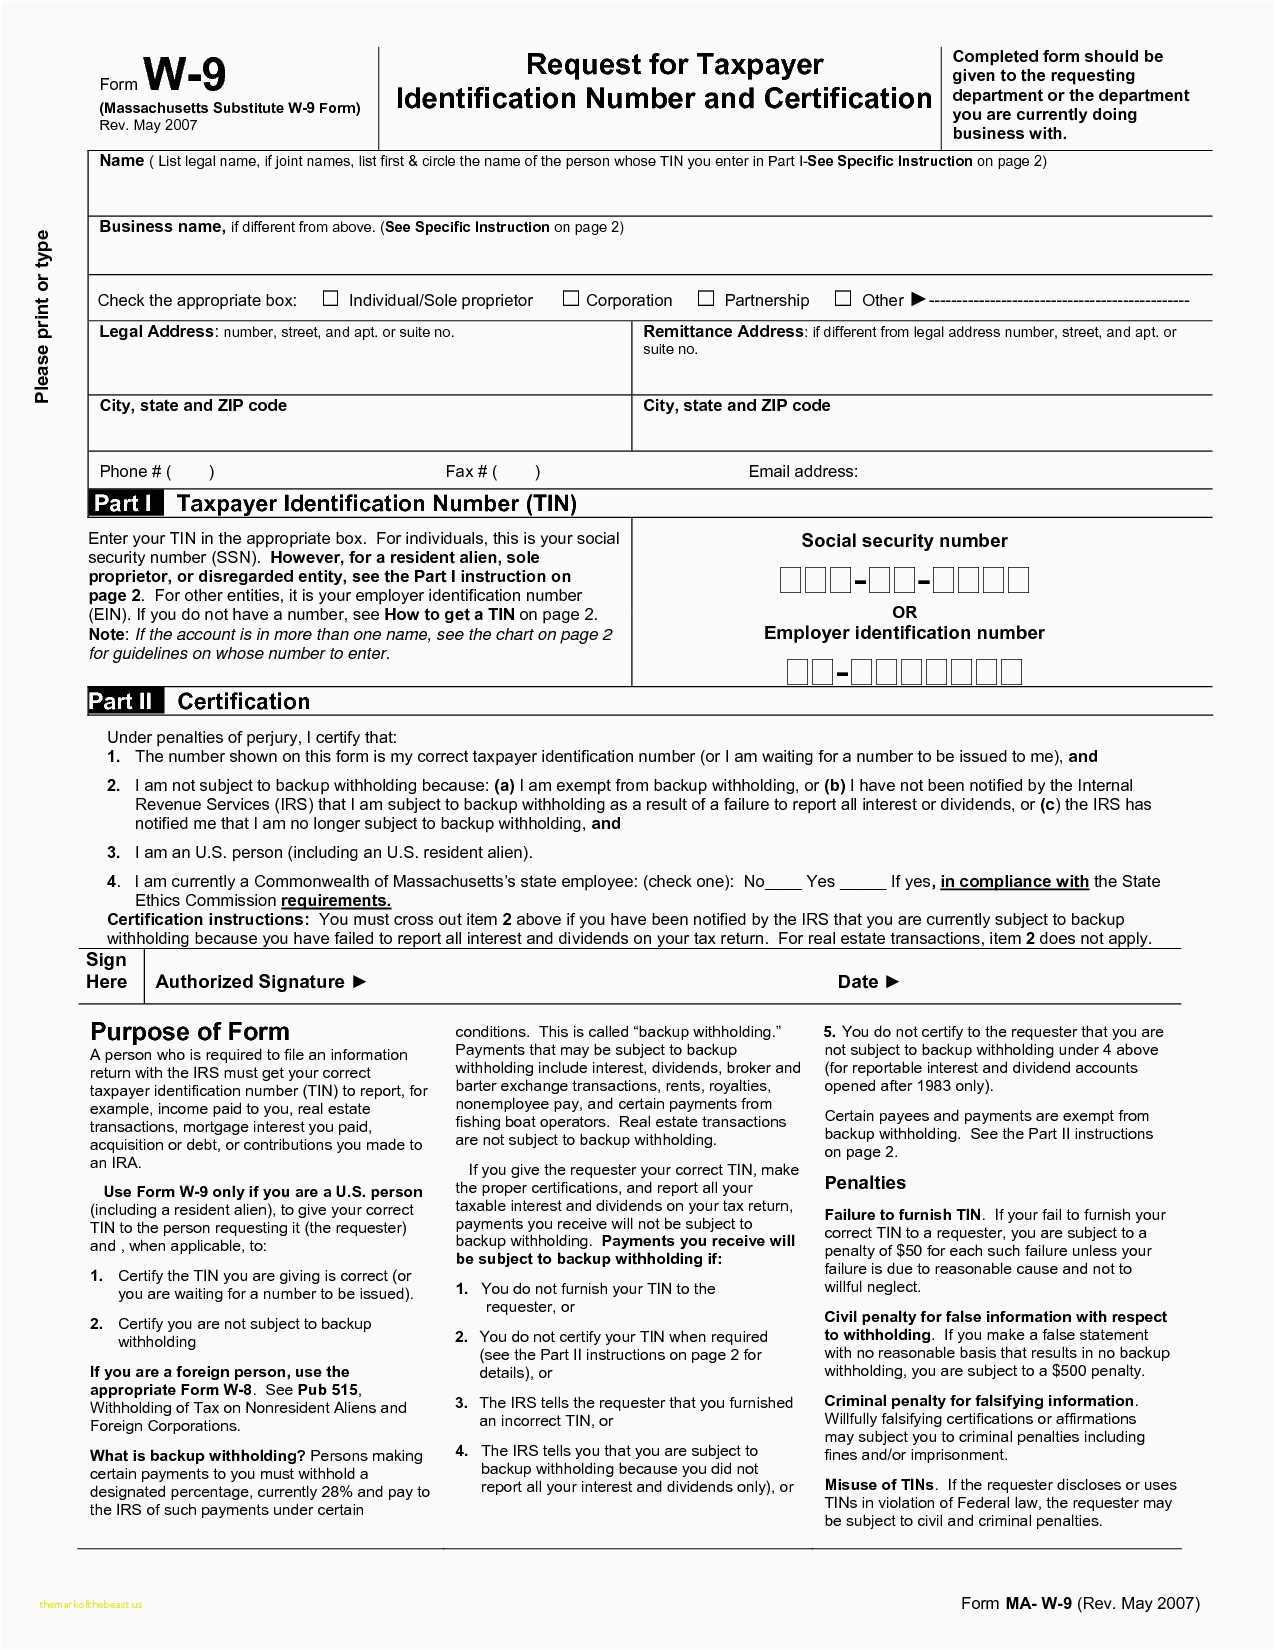 W 9 Forms For Independent Contractors 2018 W9 Template S W 9 Tax - Free Printable W9